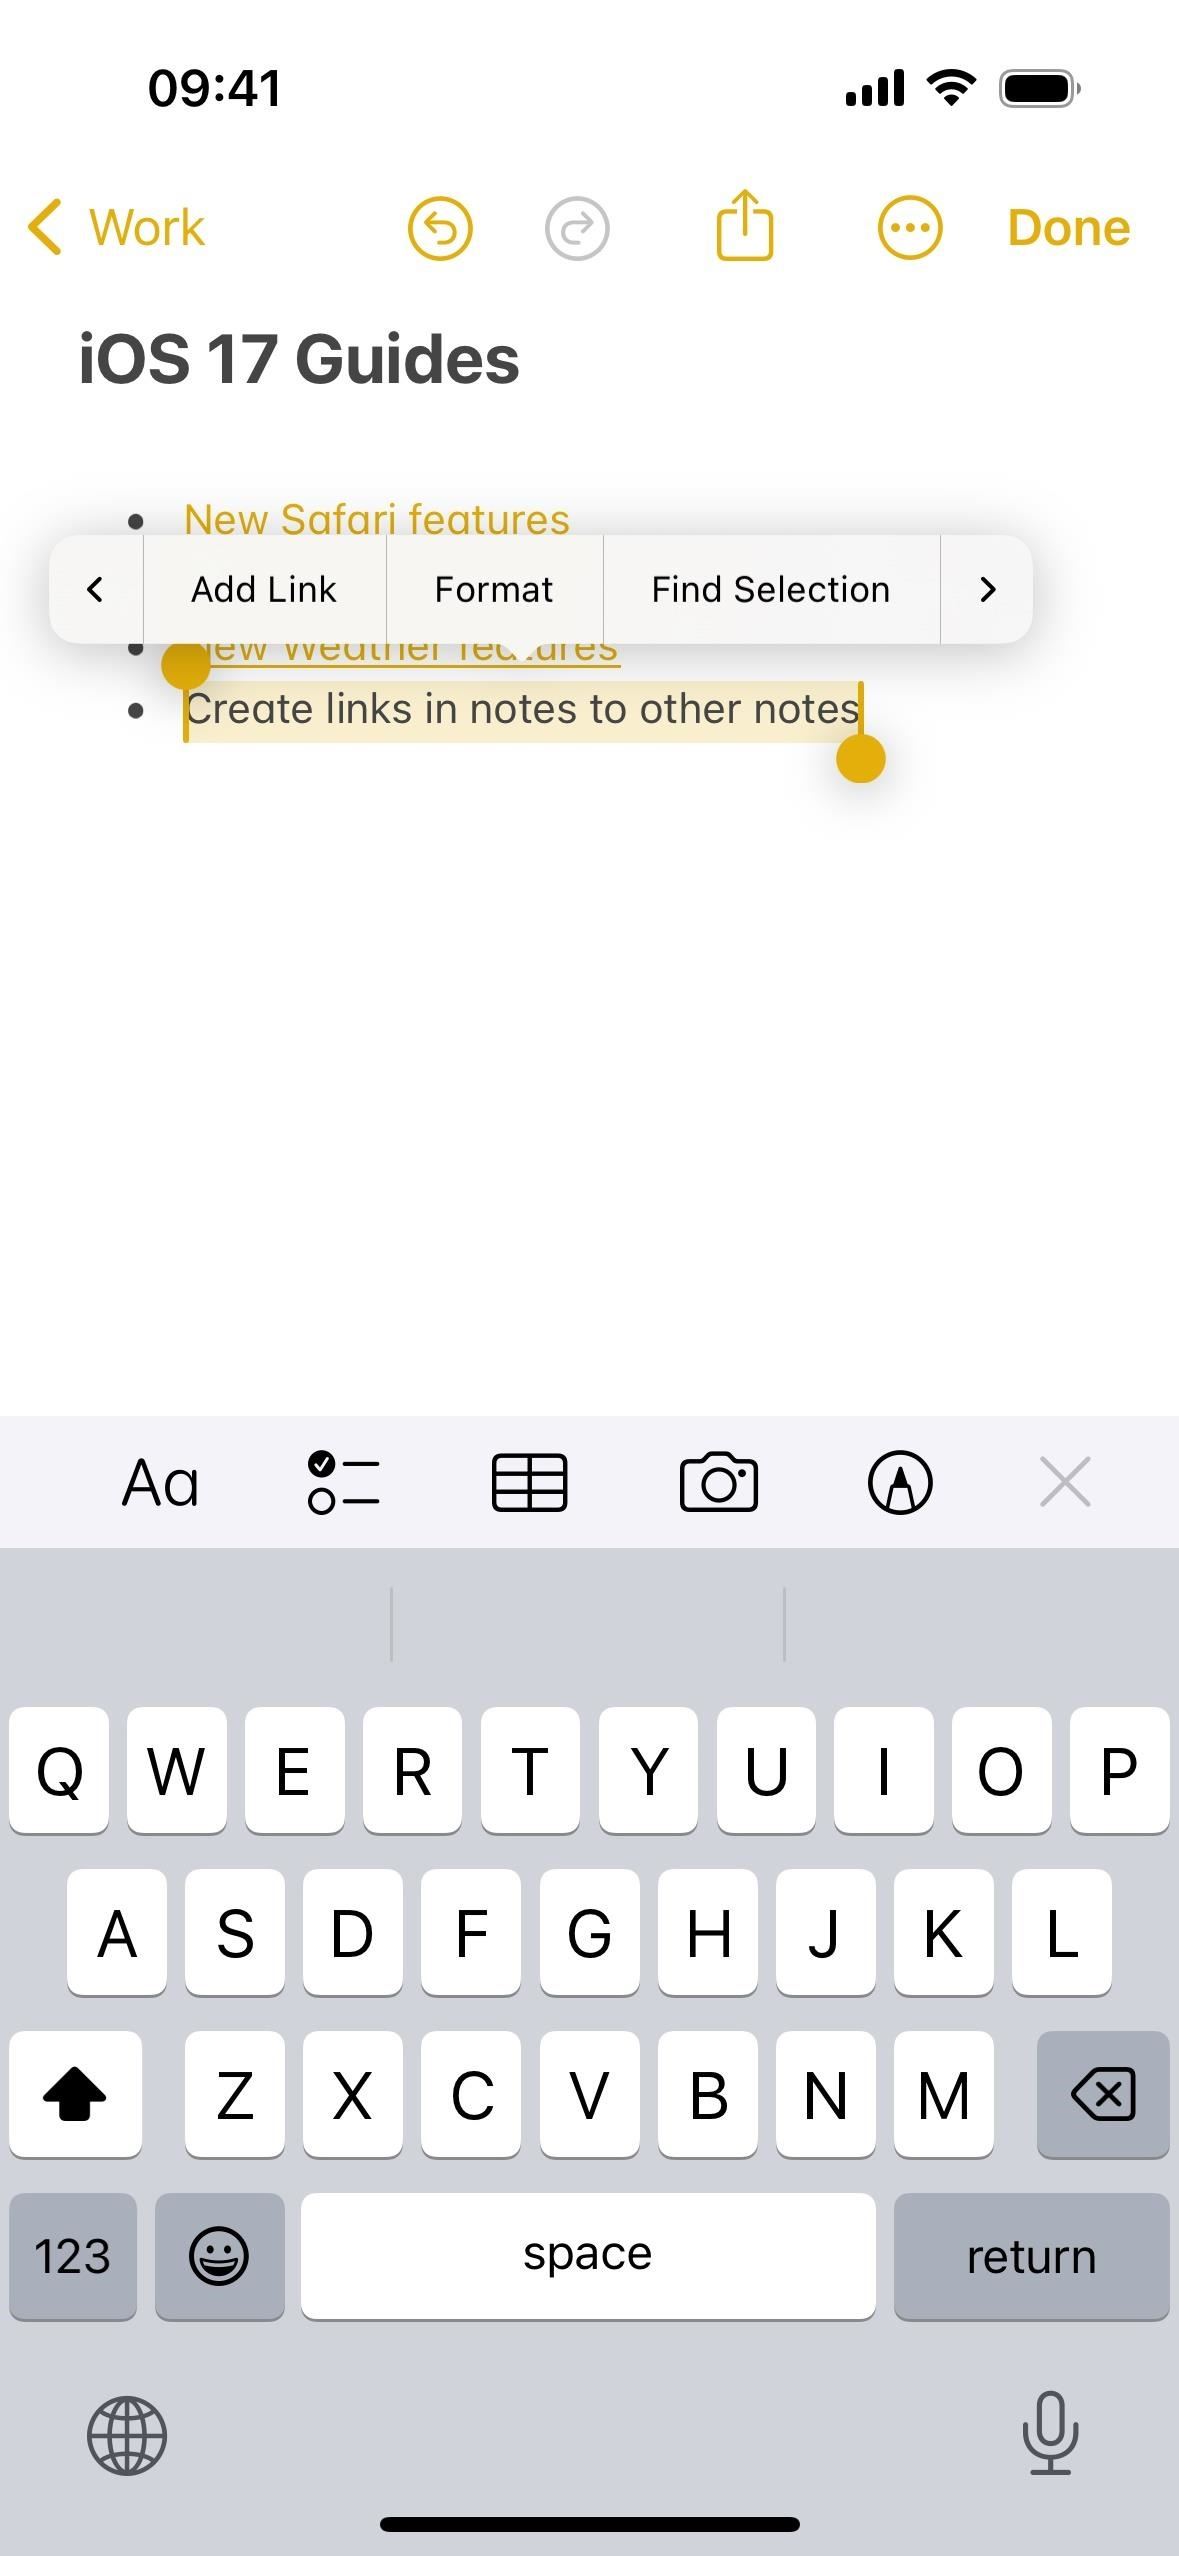 15+ New Apple Notes Features for iPhone and iPad That Will Finally Make It Your Go-To Notes App